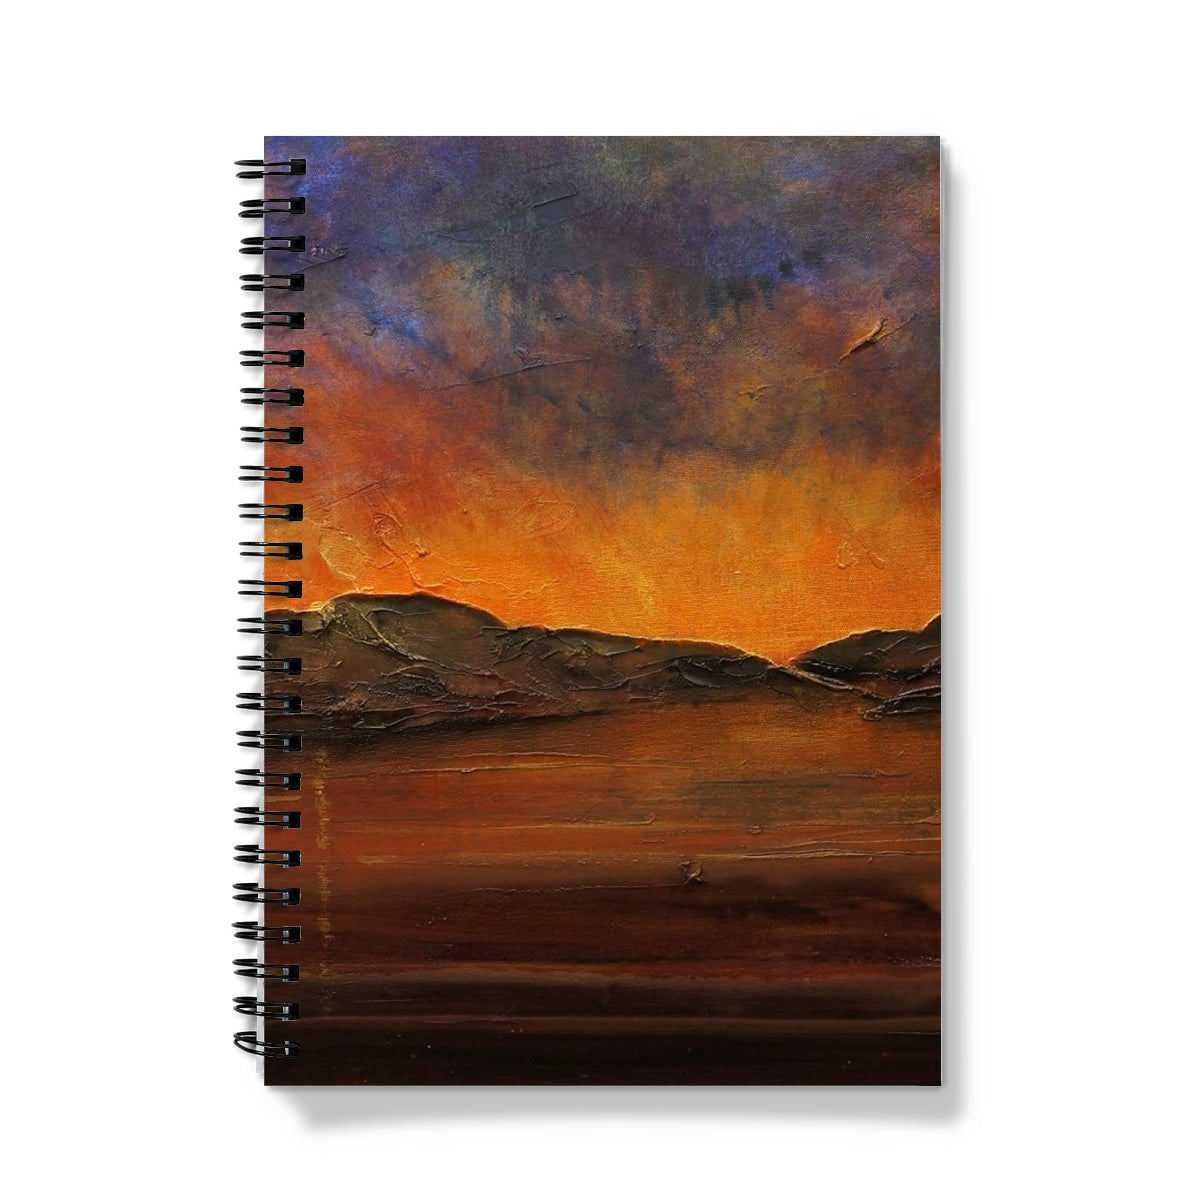 A Brooding Clyde Dusk Art Gifts Notebook-Journals & Notebooks-River Clyde Art Gallery-A5-Graph-Paintings, Prints, Homeware, Art Gifts From Scotland By Scottish Artist Kevin Hunter